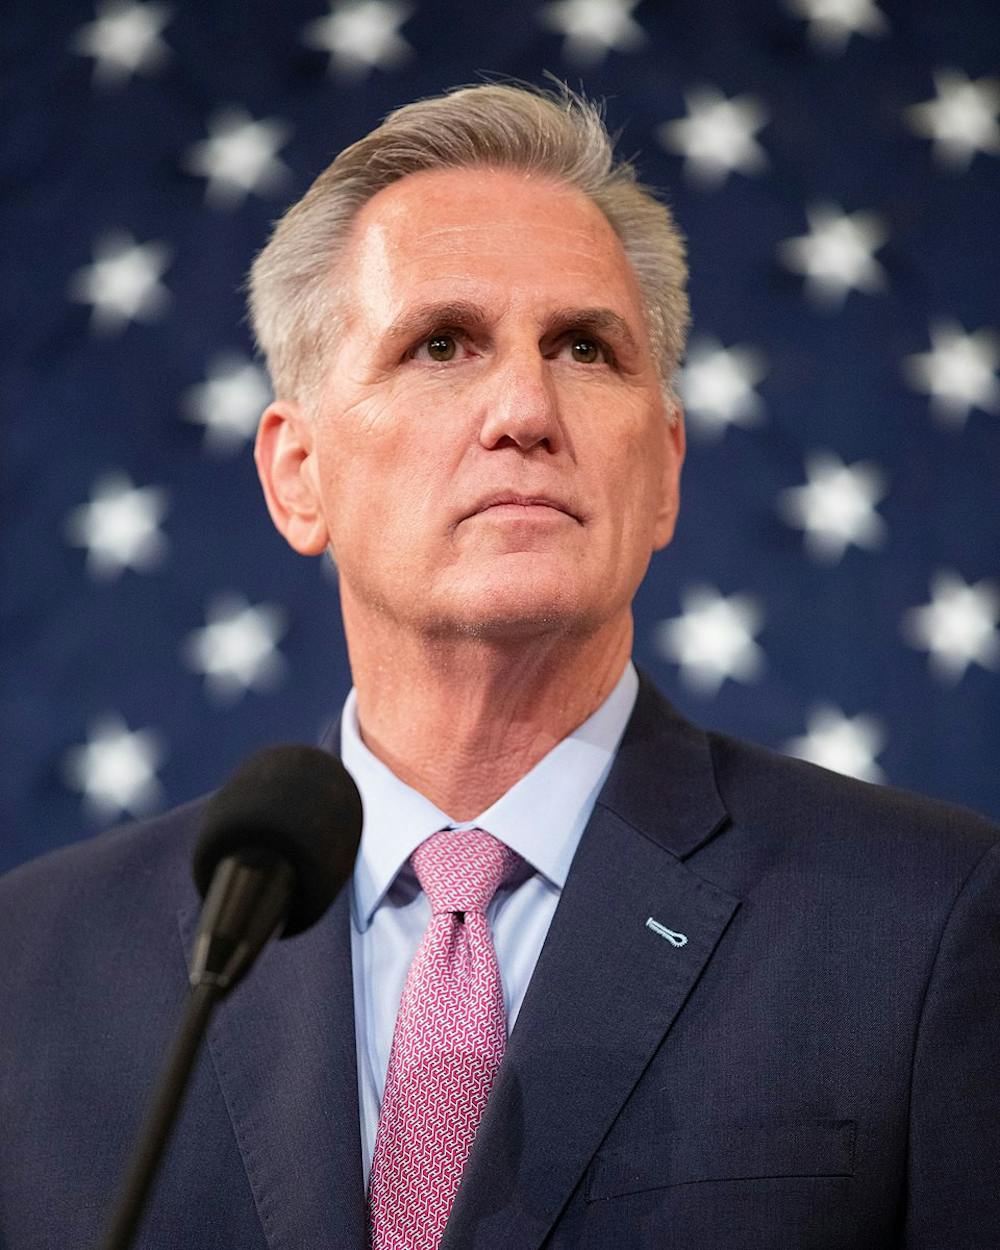 <p><em>The United States House of Representatives enters uncharted waters with the recent removal of Republican Kevin McCarthy as Speaker of the House (Photo courtesy of Wikimedia Commons/“</em><a href="https://commons.wikimedia.org/wiki/File:Kevin_McCarthy,_official_portrait,_speaker.jpg" target=""><em>Kevin McCarthy, official portrait, speaker</em></a><em>” by US House Photography. January 7, 2023). </em></p>